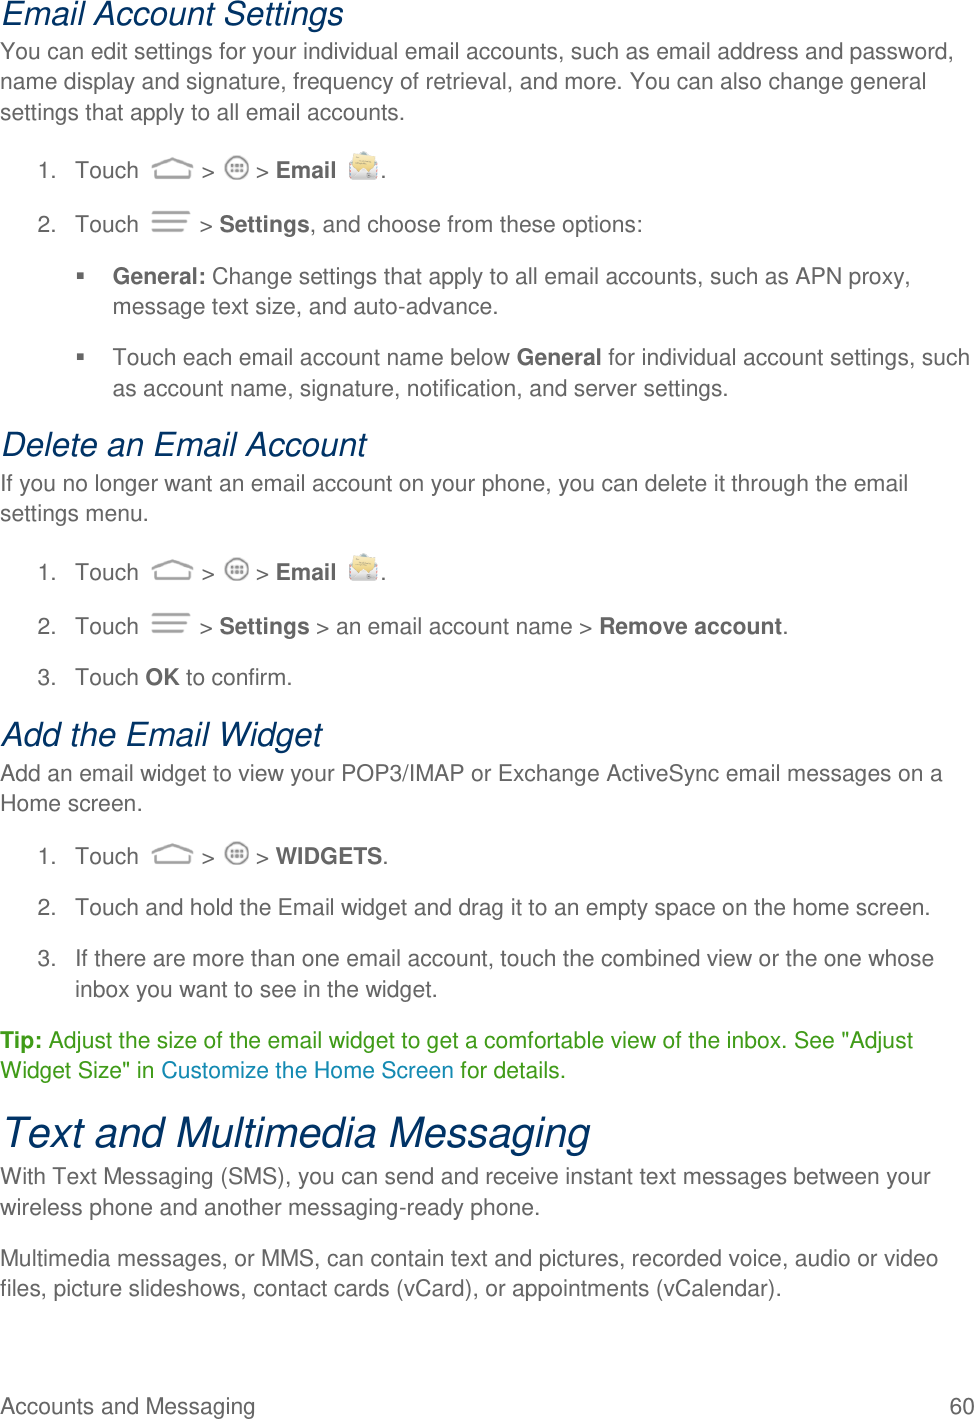 Accounts and Messaging  60 Email Account Settings You can edit settings for your individual email accounts, such as email address and password, name display and signature, frequency of retrieval, and more. You can also change general settings that apply to all email accounts. 1.  Touch   &gt;   &gt; Email  . 2.  Touch   &gt; Settings, and choose from these options:  General: Change settings that apply to all email accounts, such as APN proxy, message text size, and auto-advance.   Touch each email account name below General for individual account settings, such as account name, signature, notification, and server settings. Delete an Email Account If you no longer want an email account on your phone, you can delete it through the email settings menu. 1.  Touch   &gt;   &gt; Email  . 2.  Touch   &gt; Settings &gt; an email account name &gt; Remove account. 3.  Touch OK to confirm. Add the Email Widget Add an email widget to view your POP3/IMAP or Exchange ActiveSync email messages on a Home screen.  1.  Touch   &gt;   &gt; WIDGETS. 2.  Touch and hold the Email widget and drag it to an empty space on the home screen. 3.  If there are more than one email account, touch the combined view or the one whose inbox you want to see in the widget. Tip: Adjust the size of the email widget to get a comfortable view of the inbox. See &quot;Adjust Widget Size&quot; in Customize the Home Screen for details. Text and Multimedia Messaging With Text Messaging (SMS), you can send and receive instant text messages between your wireless phone and another messaging-ready phone. Multimedia messages, or MMS, can contain text and pictures, recorded voice, audio or video files, picture slideshows, contact cards (vCard), or appointments (vCalendar). 